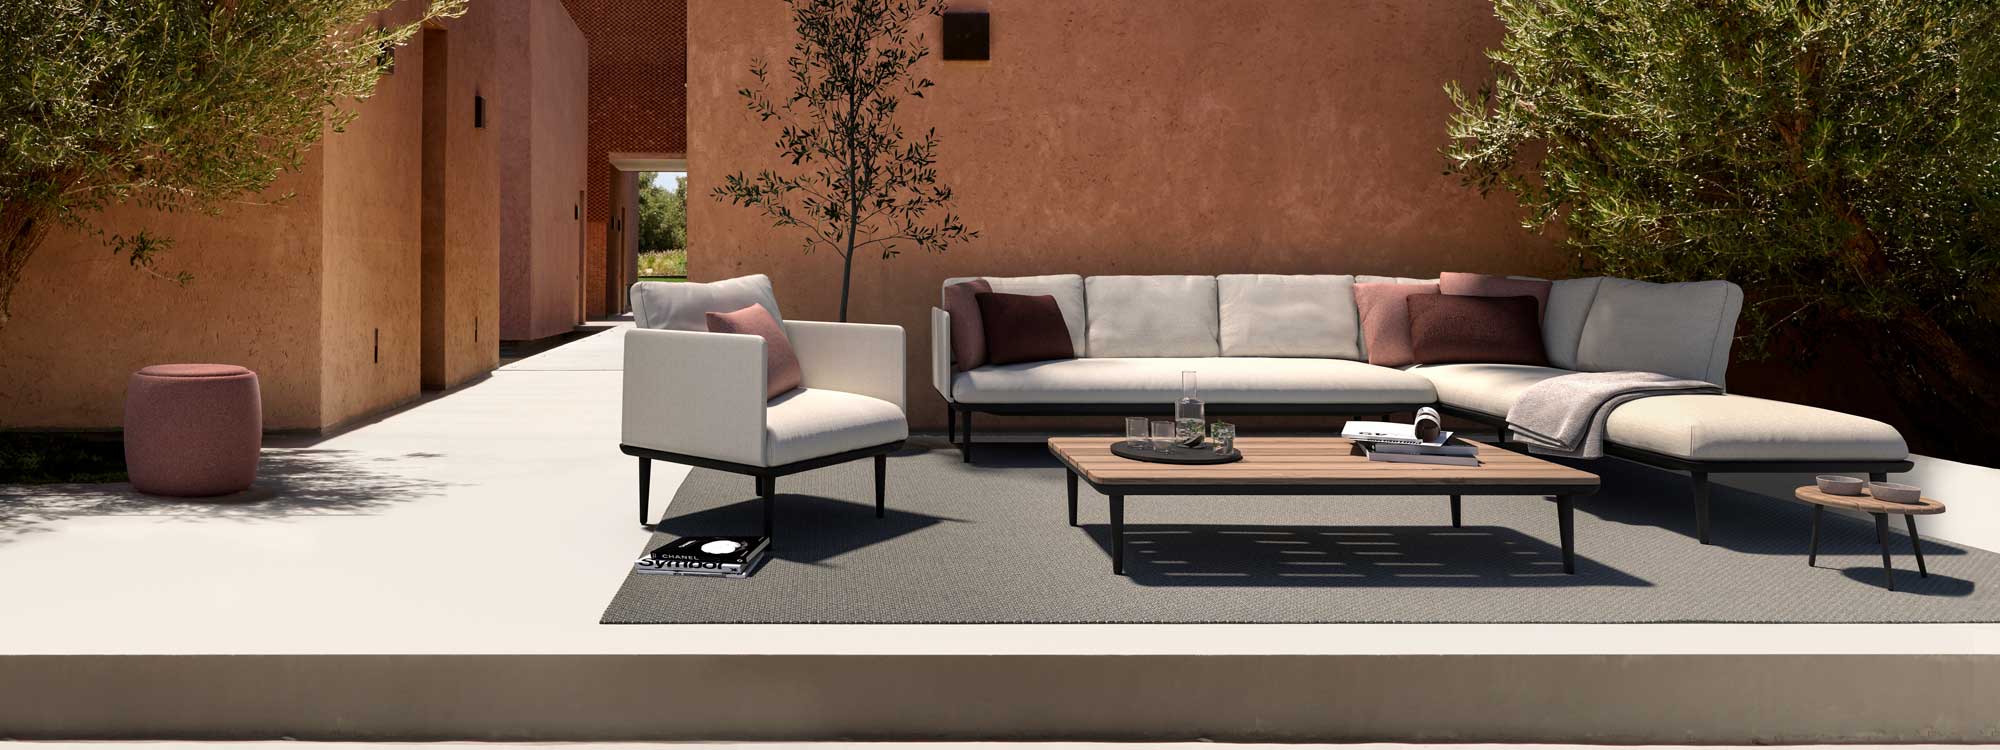 Image of Royal Botania corner sofa and lounge chair in terracotta-colored courtyard